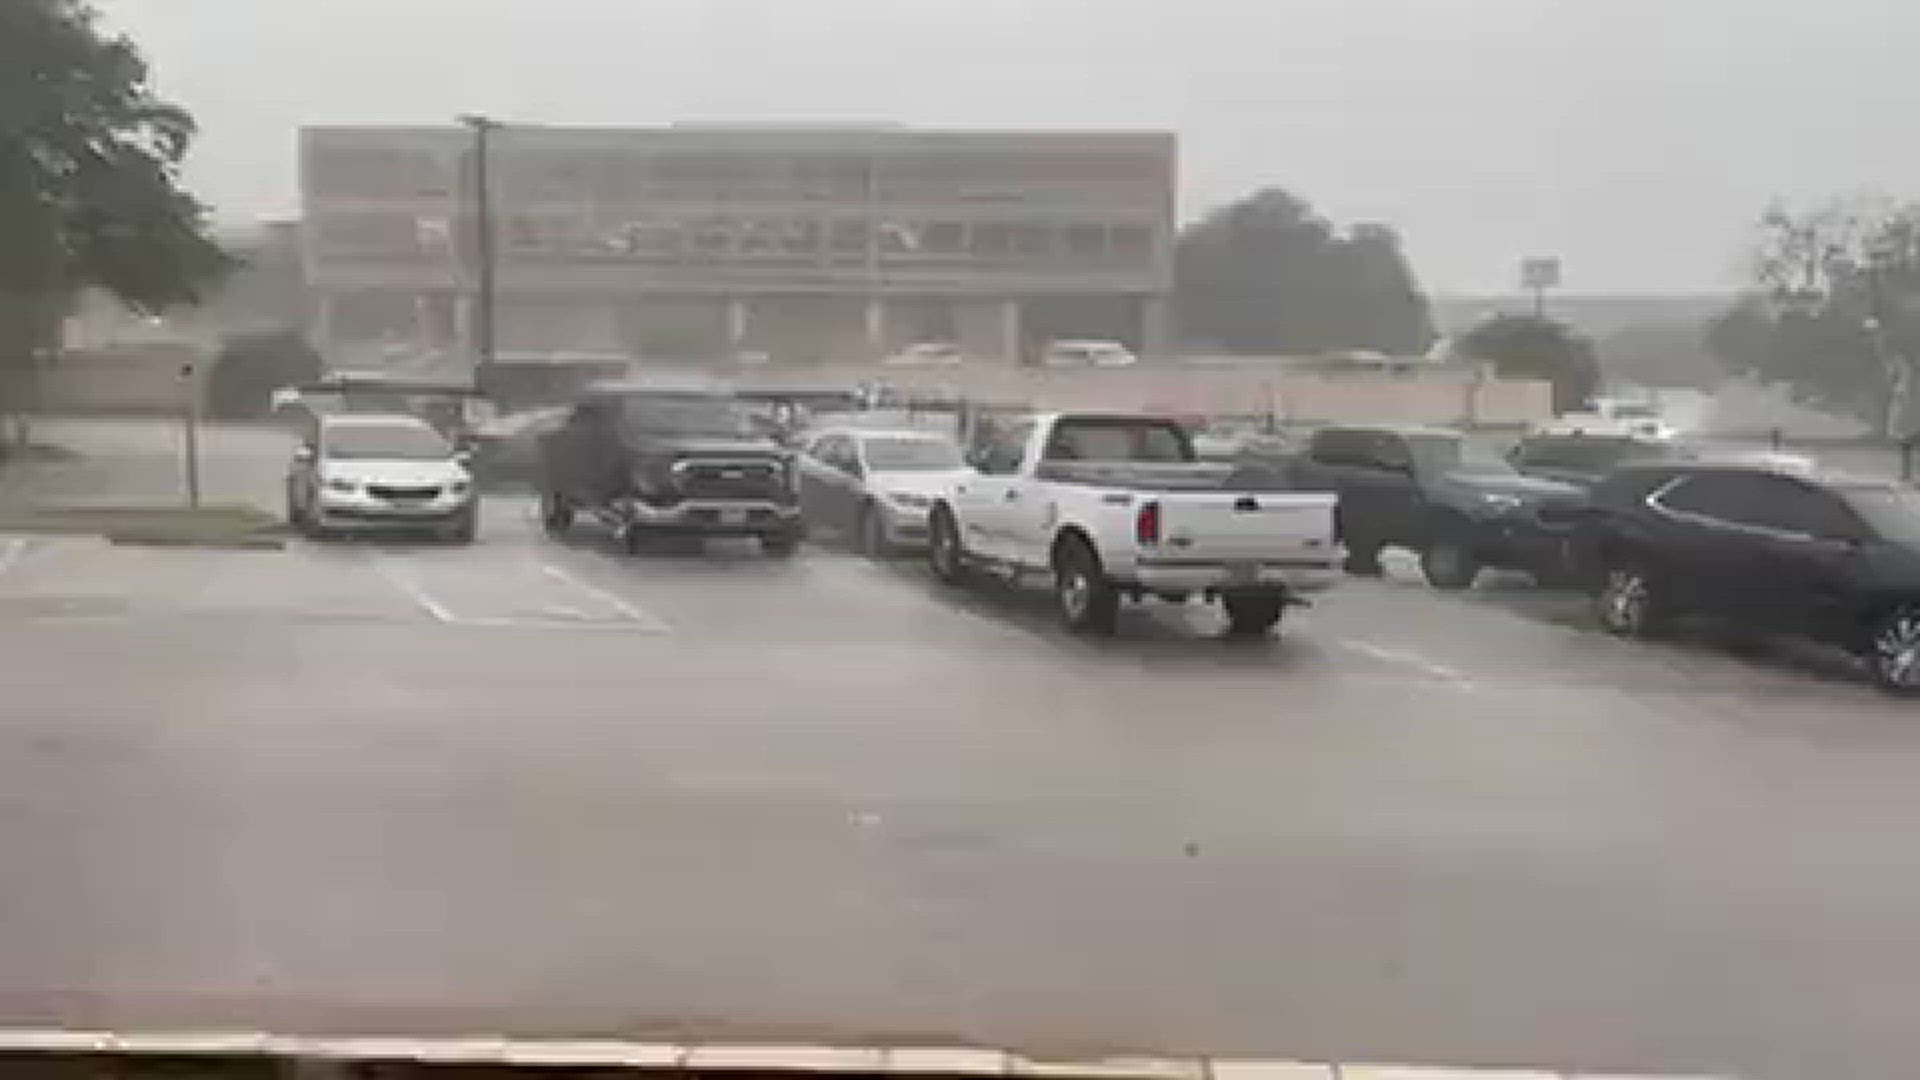 Sheets of rain pour down during storms in Temple Texas
Credit: Jacob Wallin